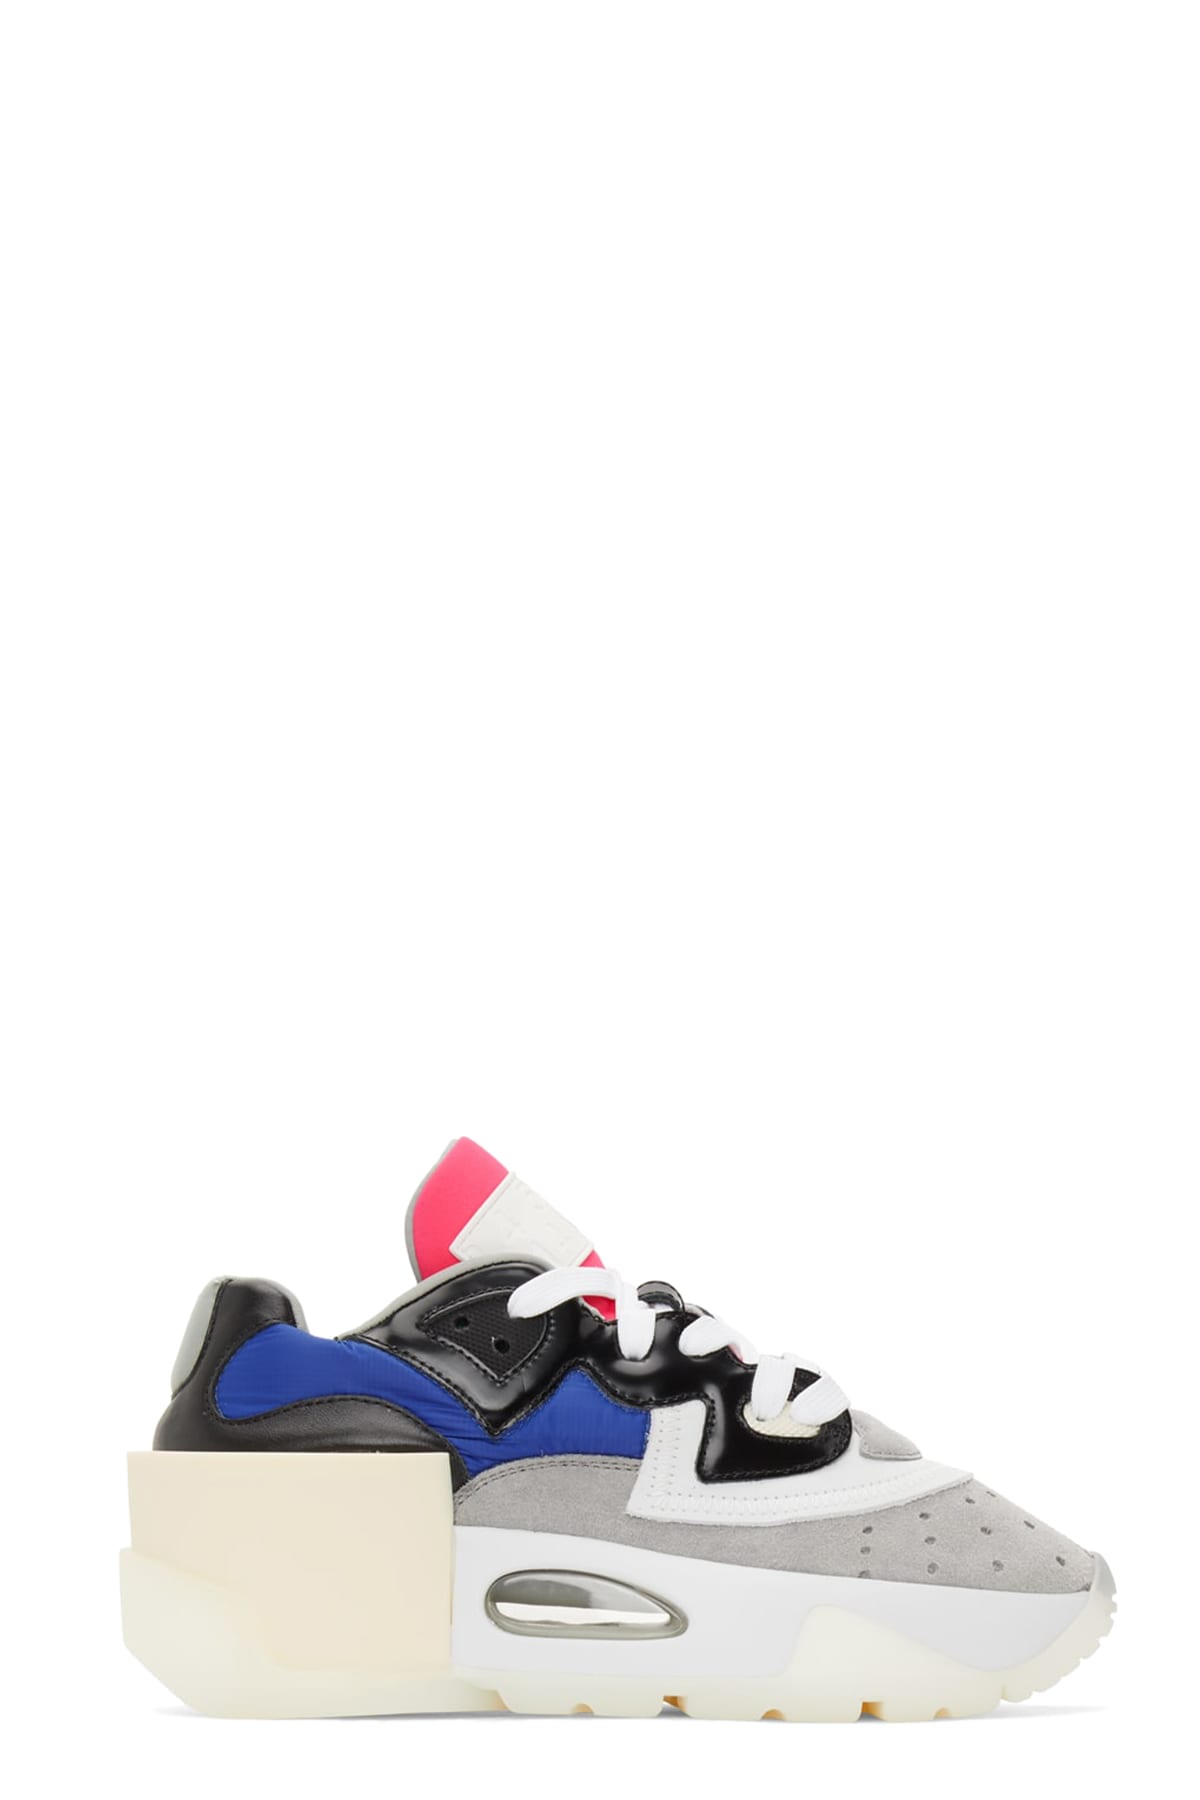 MM6 Maison Margiela Chunky Low-top Sneakers